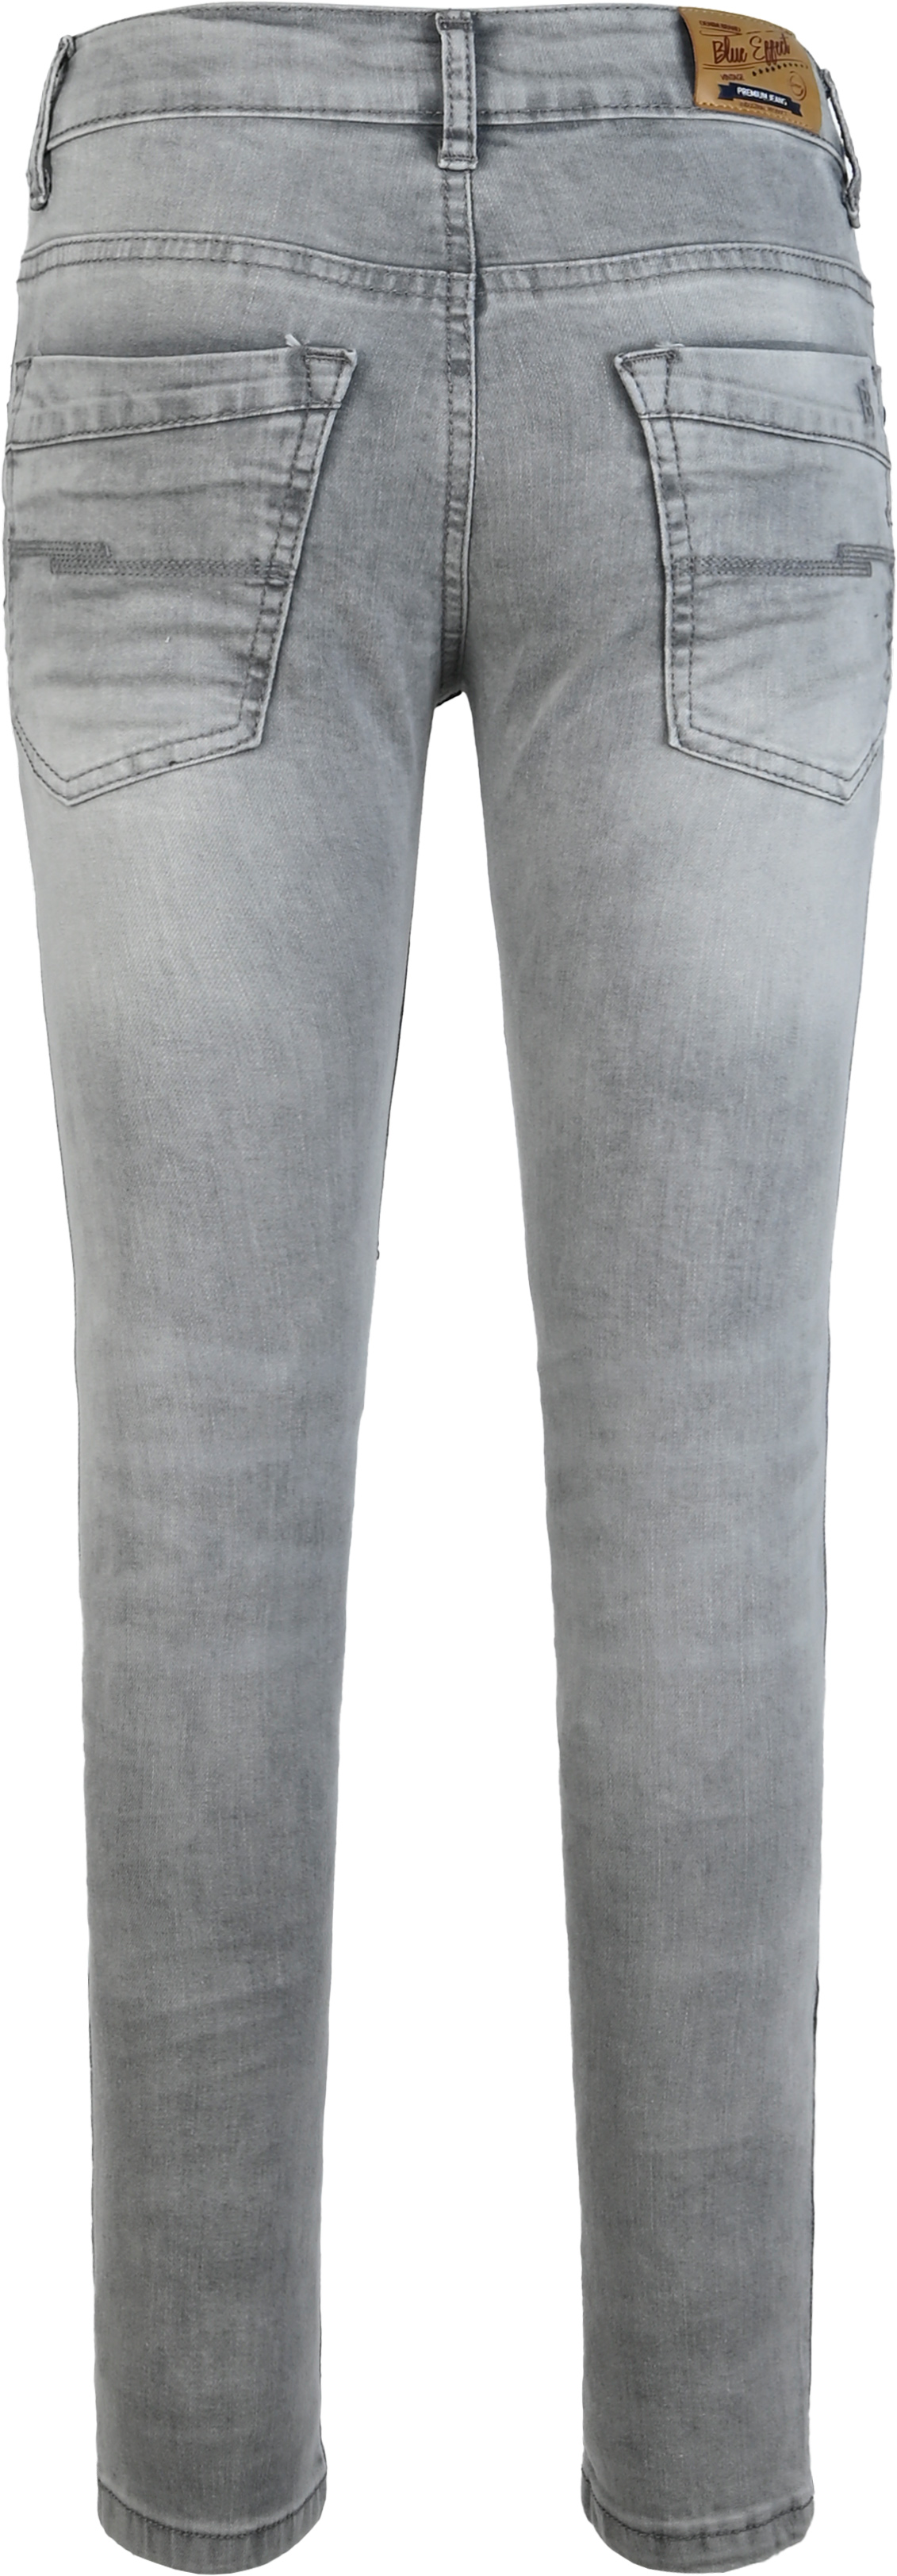 2825-Boys Special Skinny Jeans Ultrastretch, available in Slim,Normal